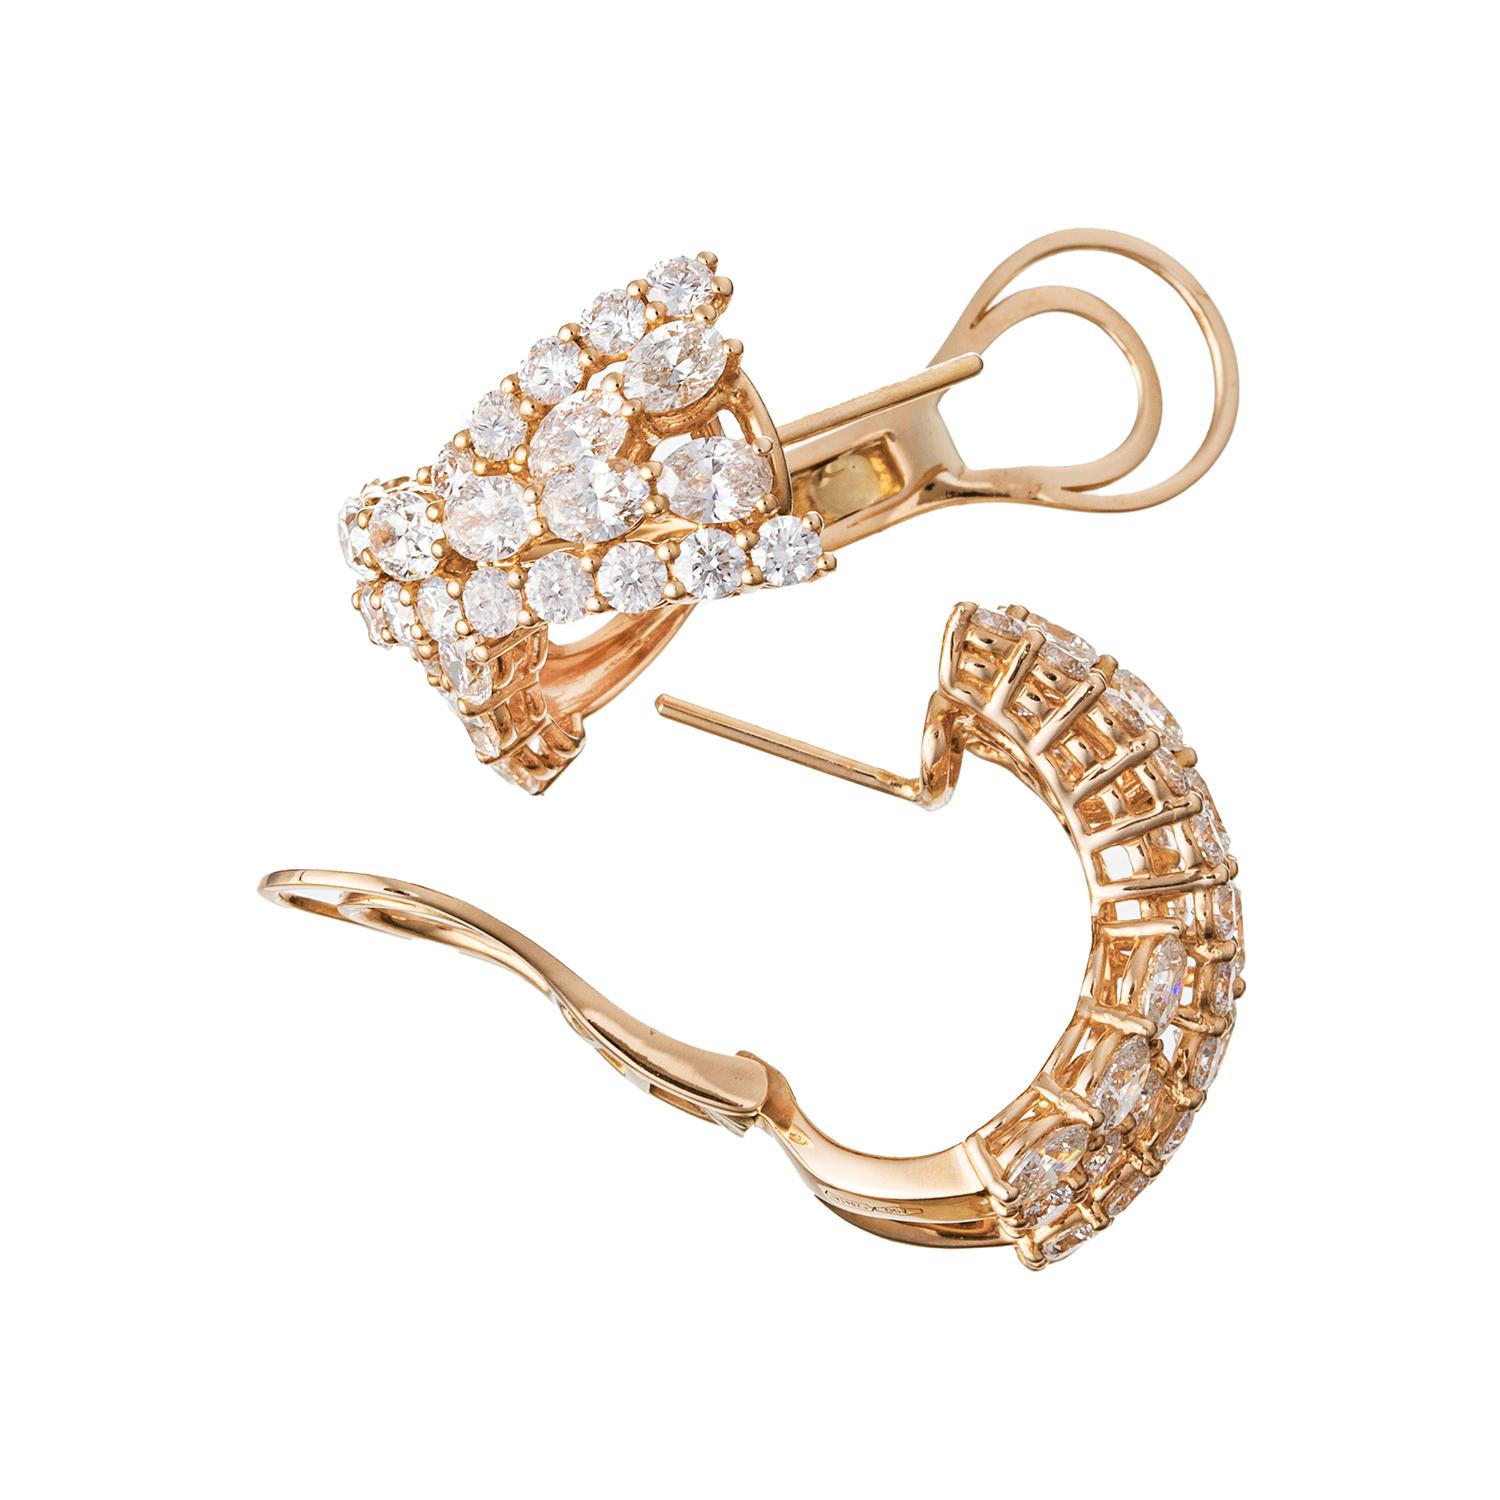 Diamond crossover earrings, set with oval and round brilliant-cut diamonds in polished 18k rose gold.  Diamonds weighing 5.82 total carats.  Clip backs with posts.  Handmade in Italy by Leo Pizzo.  0.9